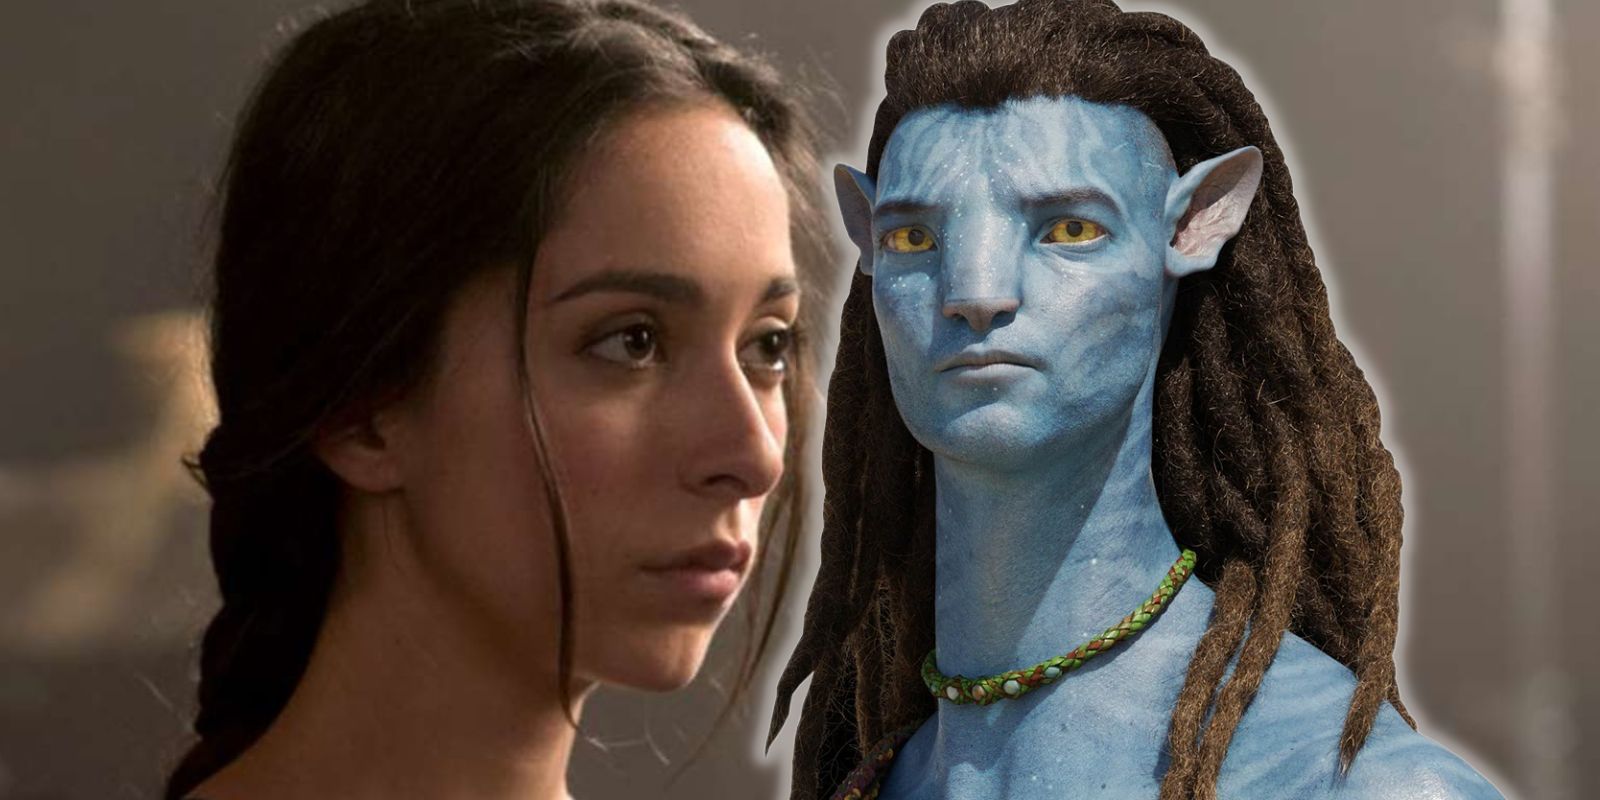 Oona Chaplin alongside Jake Sully from Avatar: The Way of Water